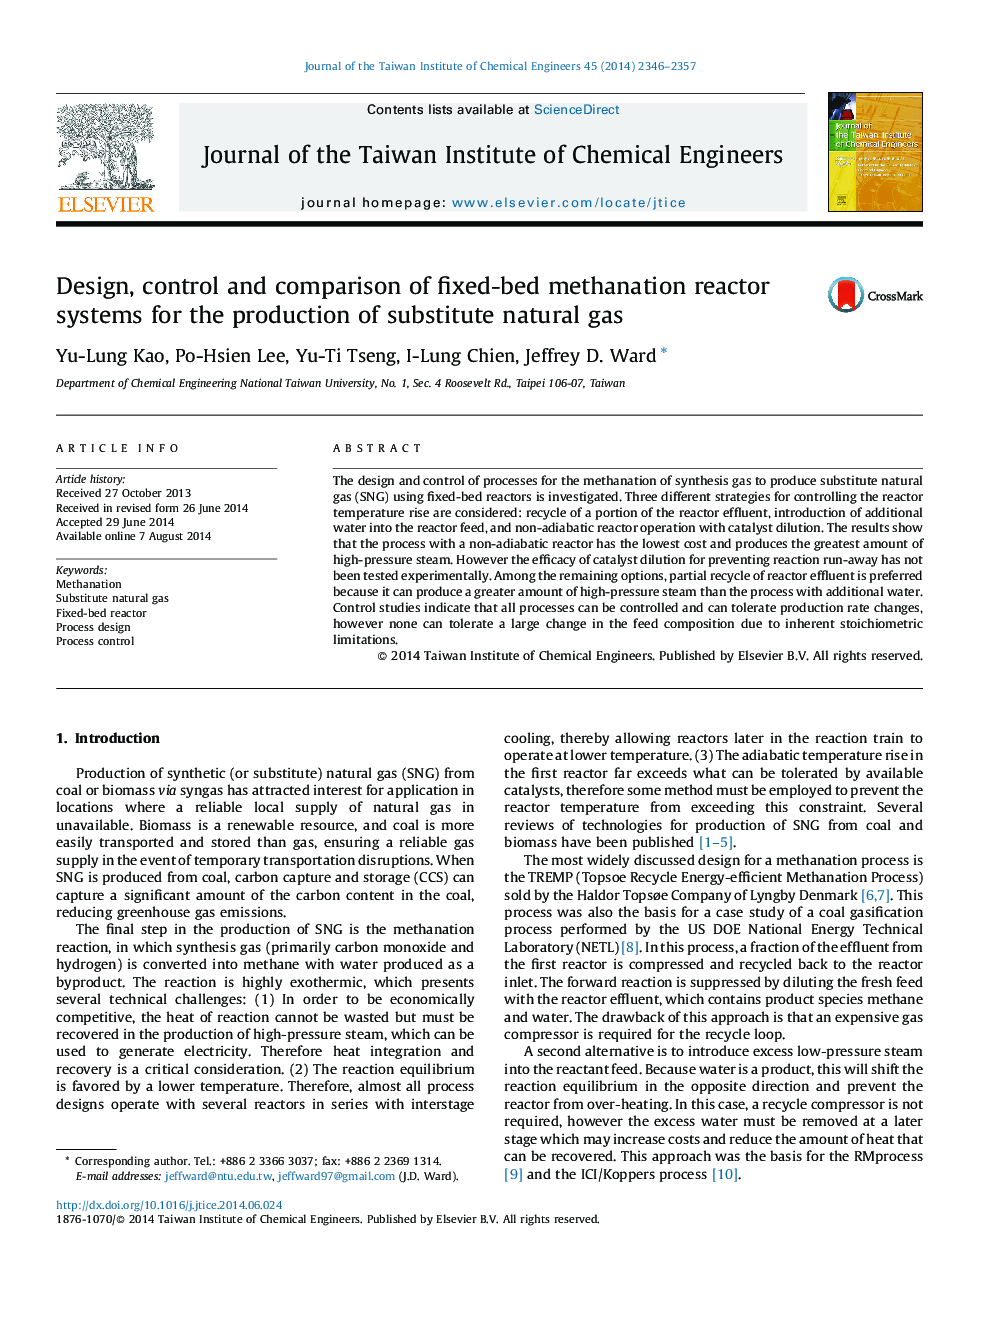 Design, control and comparison of fixed-bed methanation reactor systems for the production of substitute natural gas